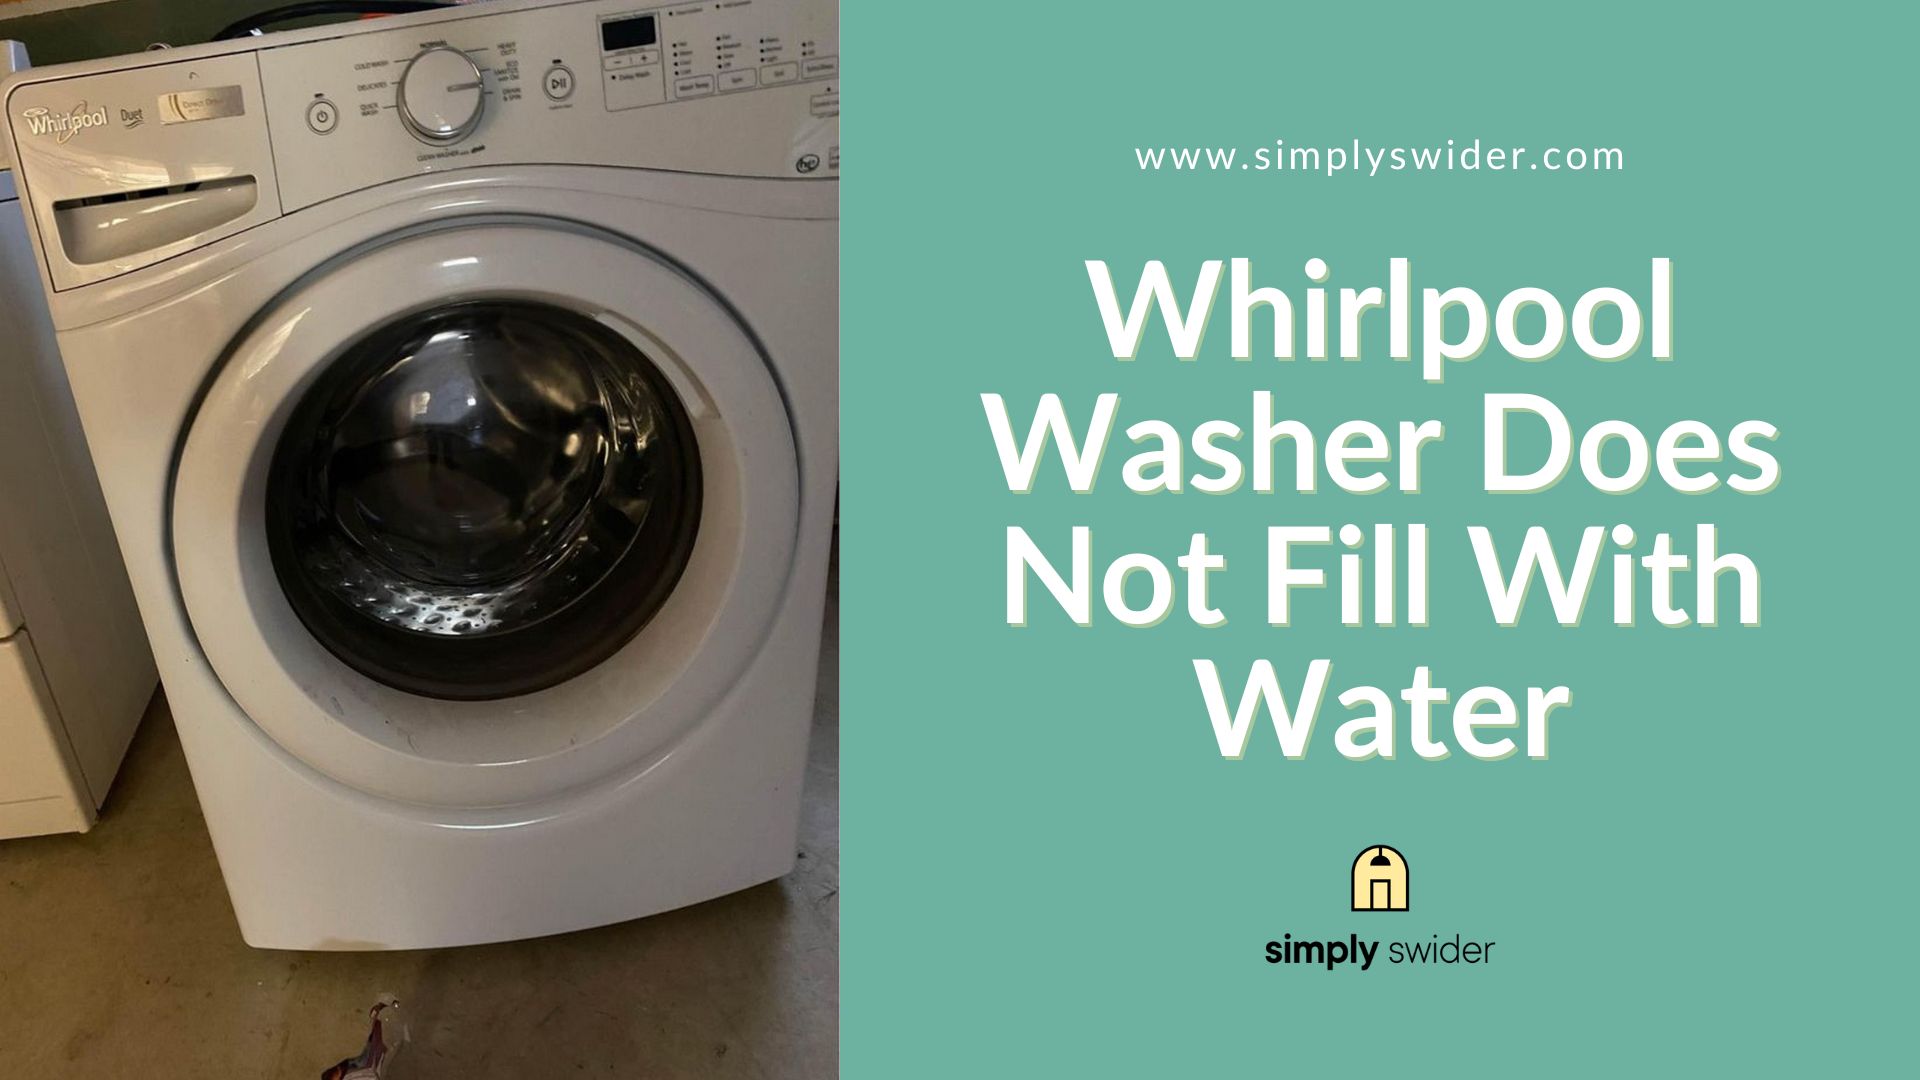 Whirlpool Washer Does Not Fill With Water